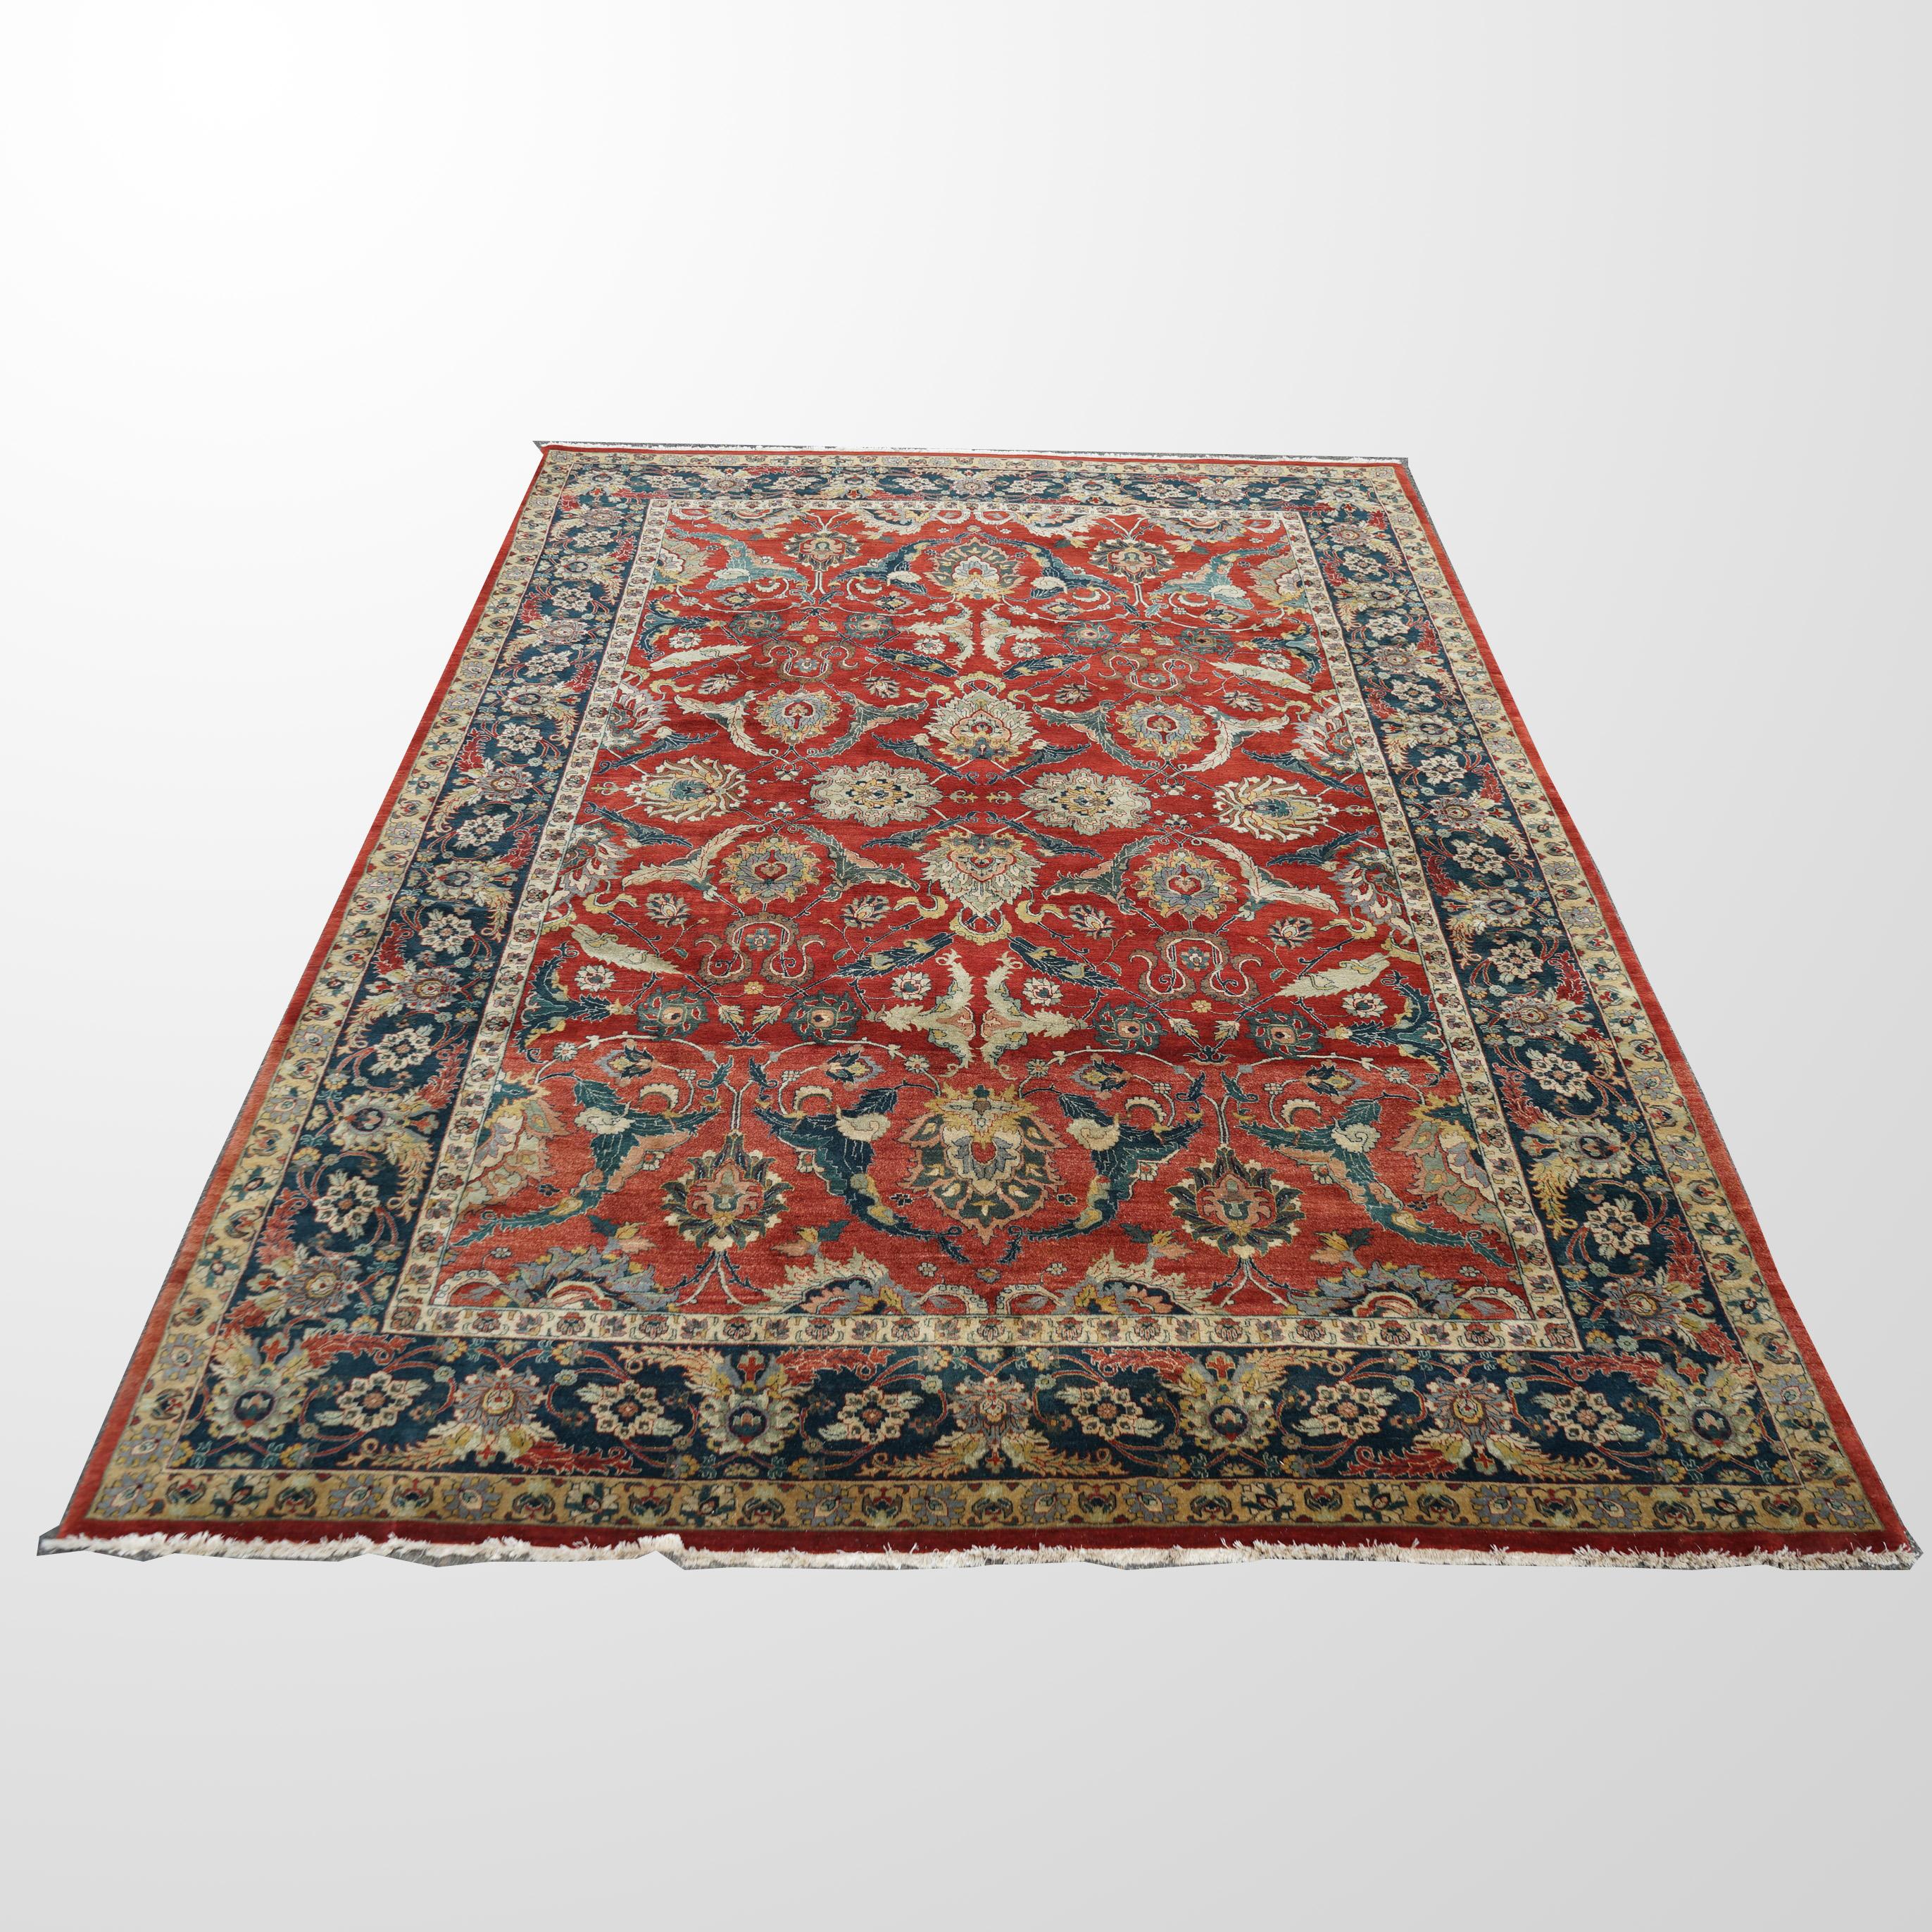 An antique Kashan oriental rug offers wool construction with stylized floral and foliate elements, c1940

Measures - 124